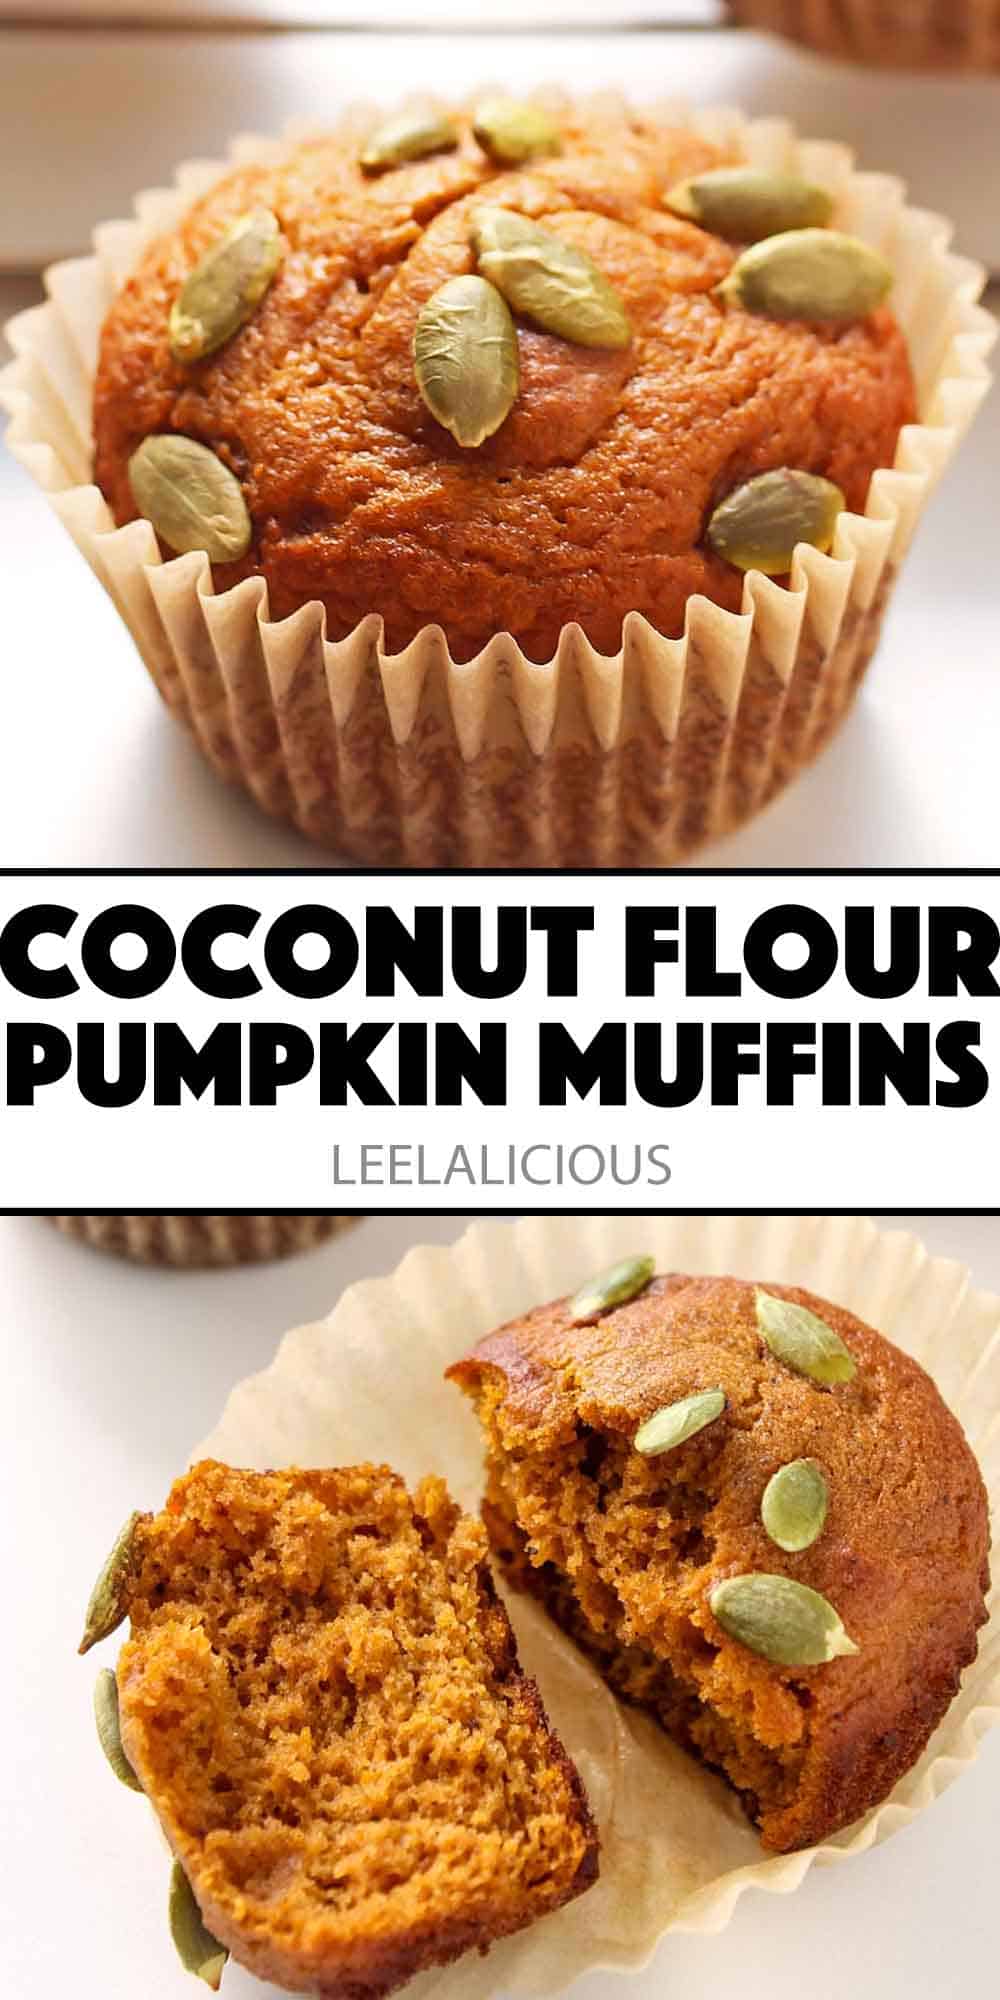 Close up of pumpkin muffin with pumpkin seed topping and halved muffin to reveal fluffy inside texture